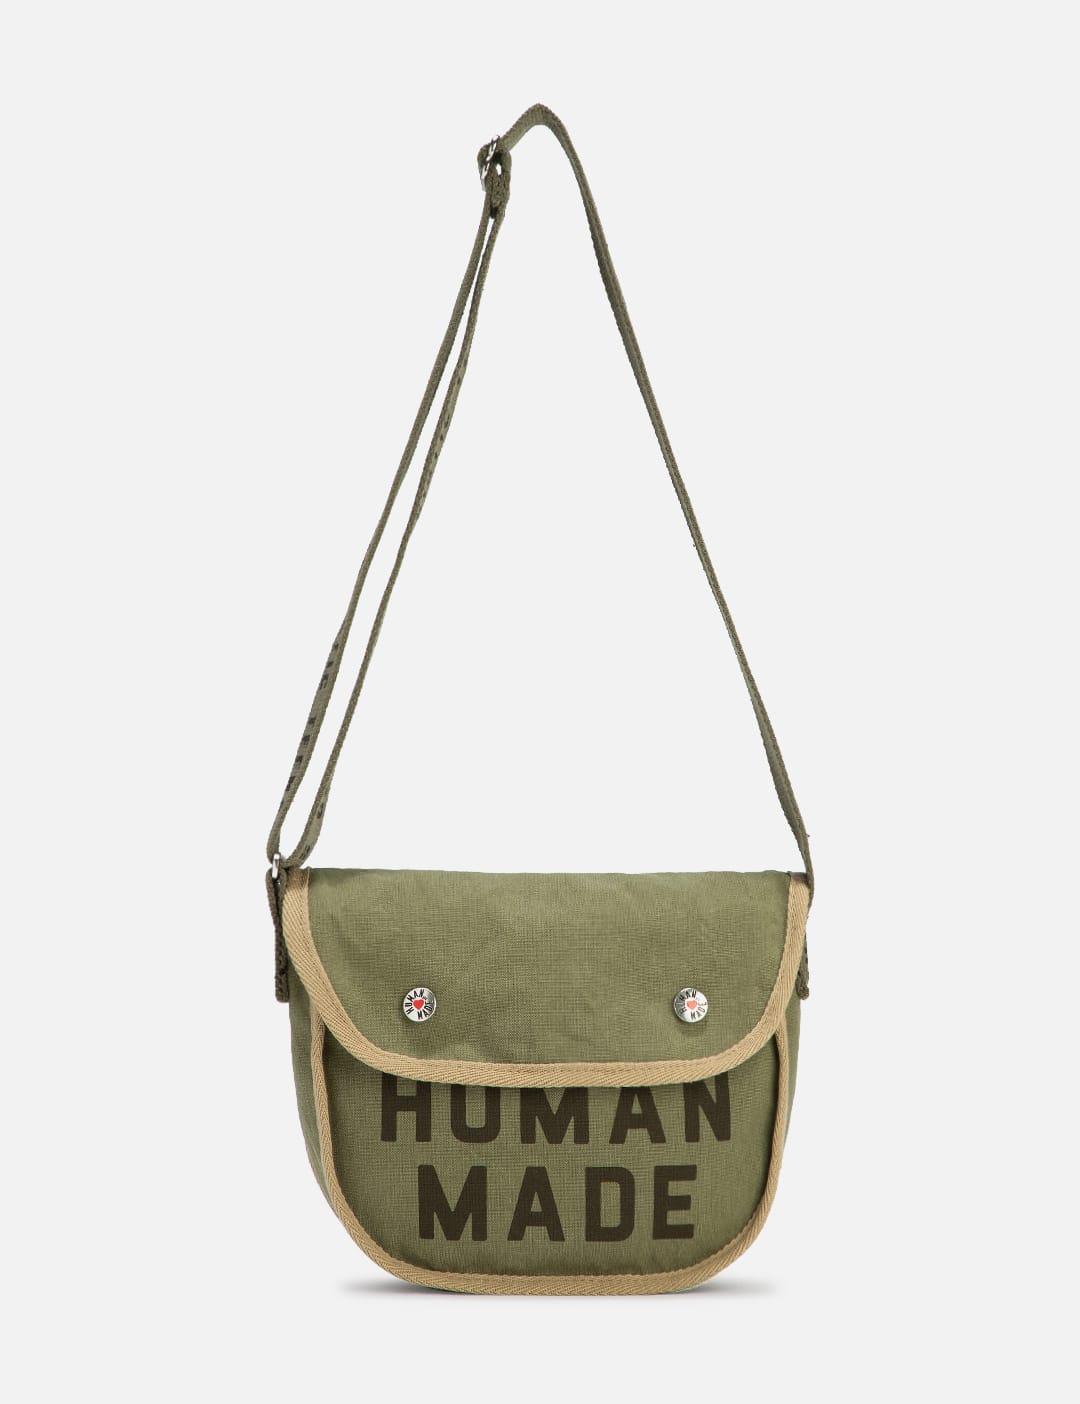 Human Made   Small Tool Bag   HBX   Globally Curated Fashion and